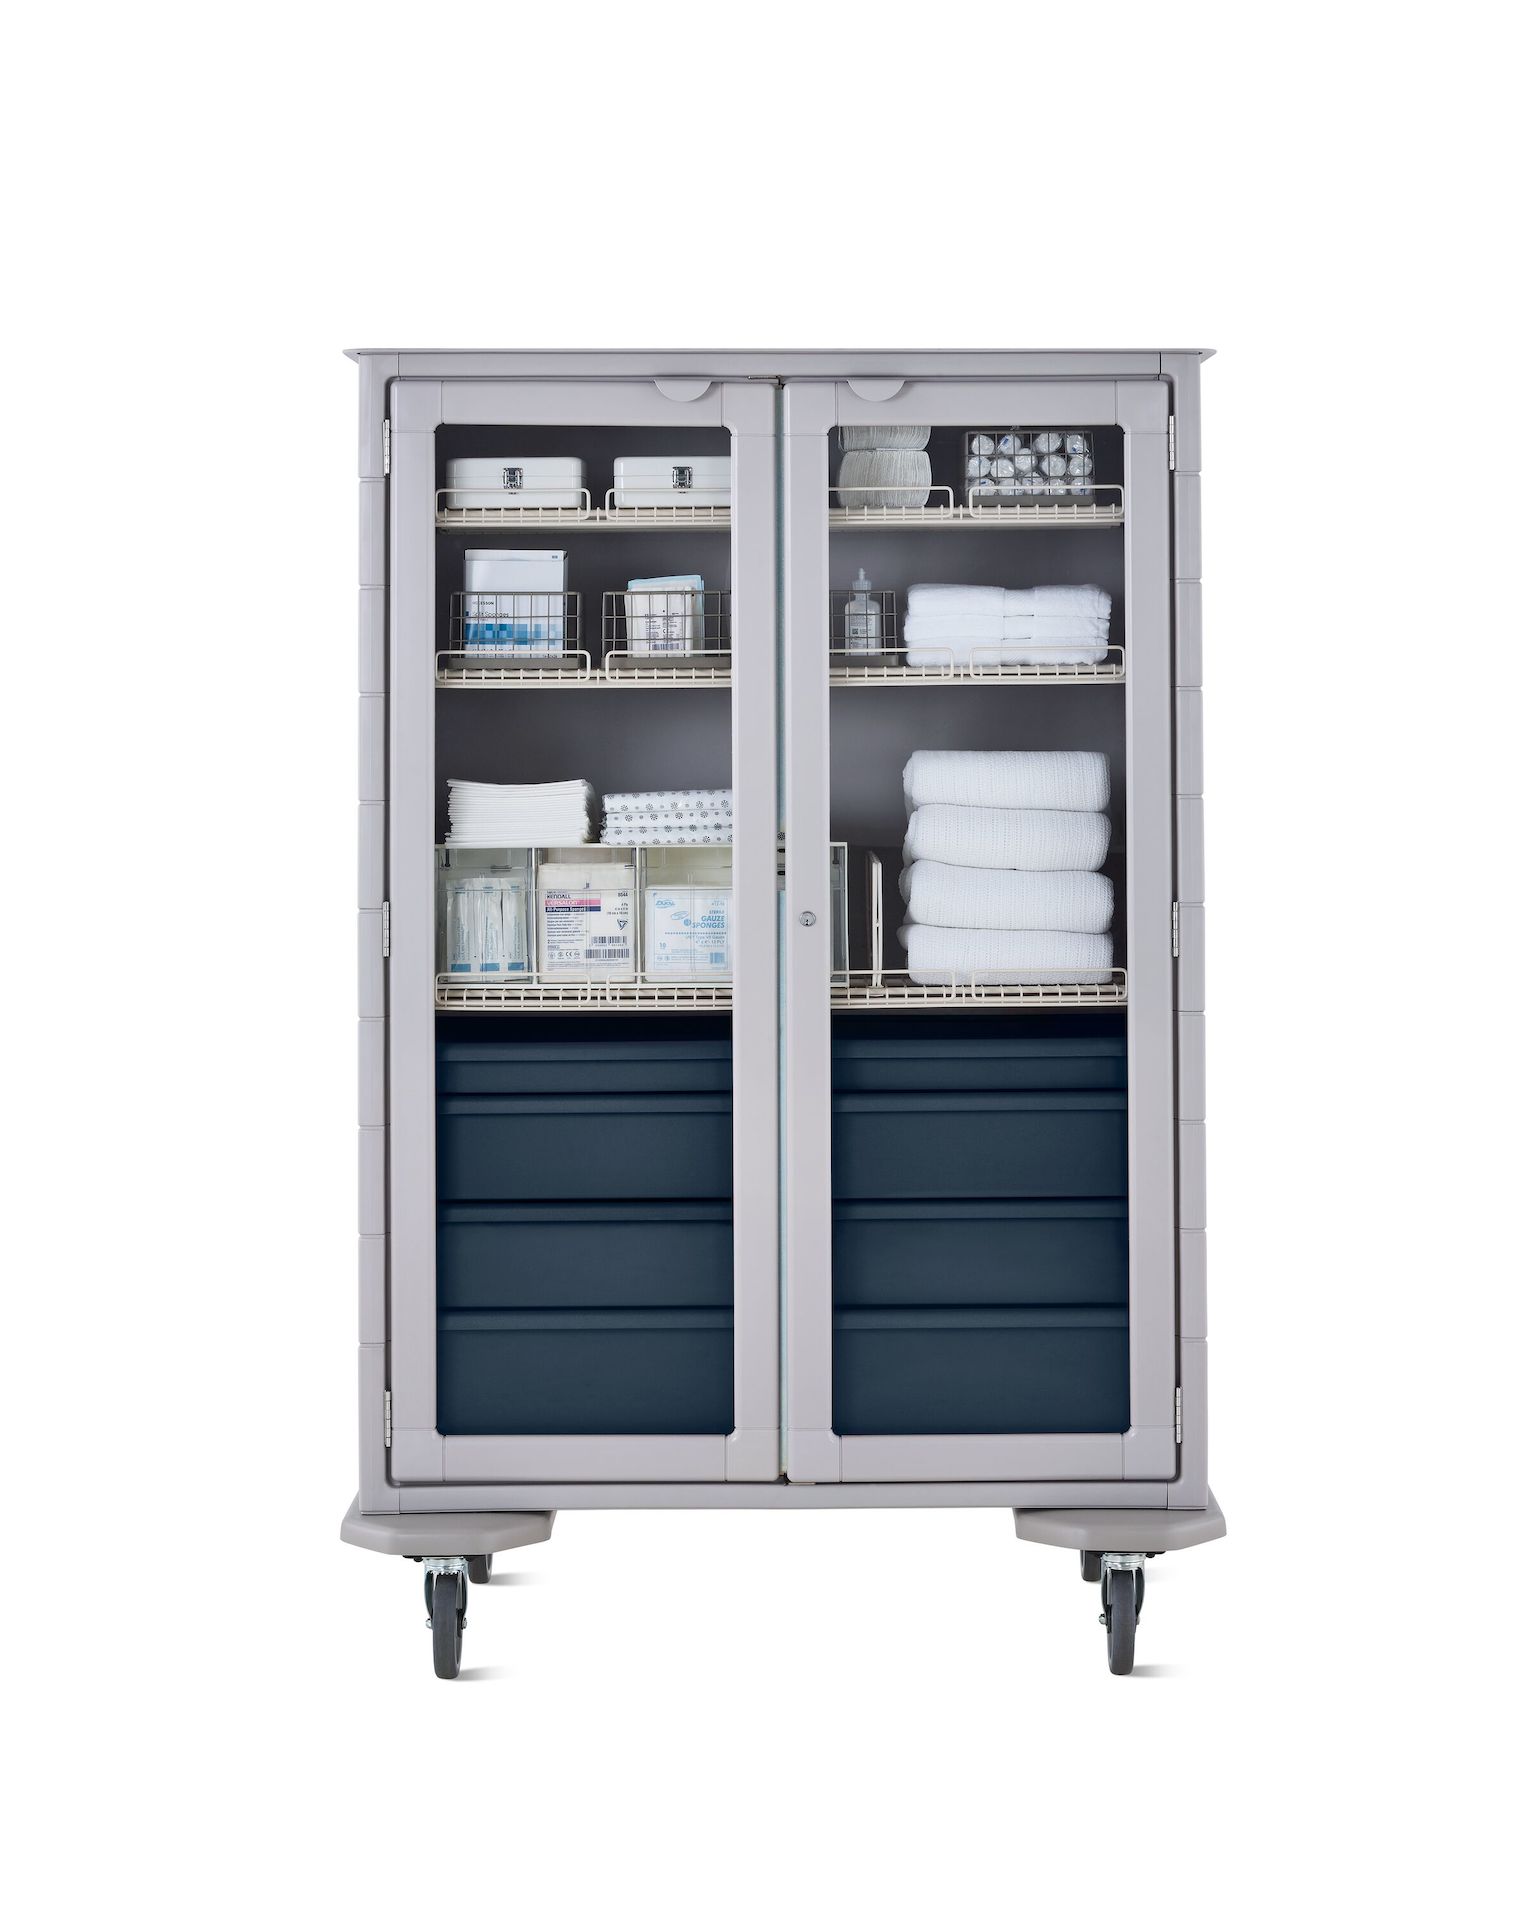 Mobile double-wide supply cart with light gray body, dark blue drawers, wire shelves, and locking glass doors.